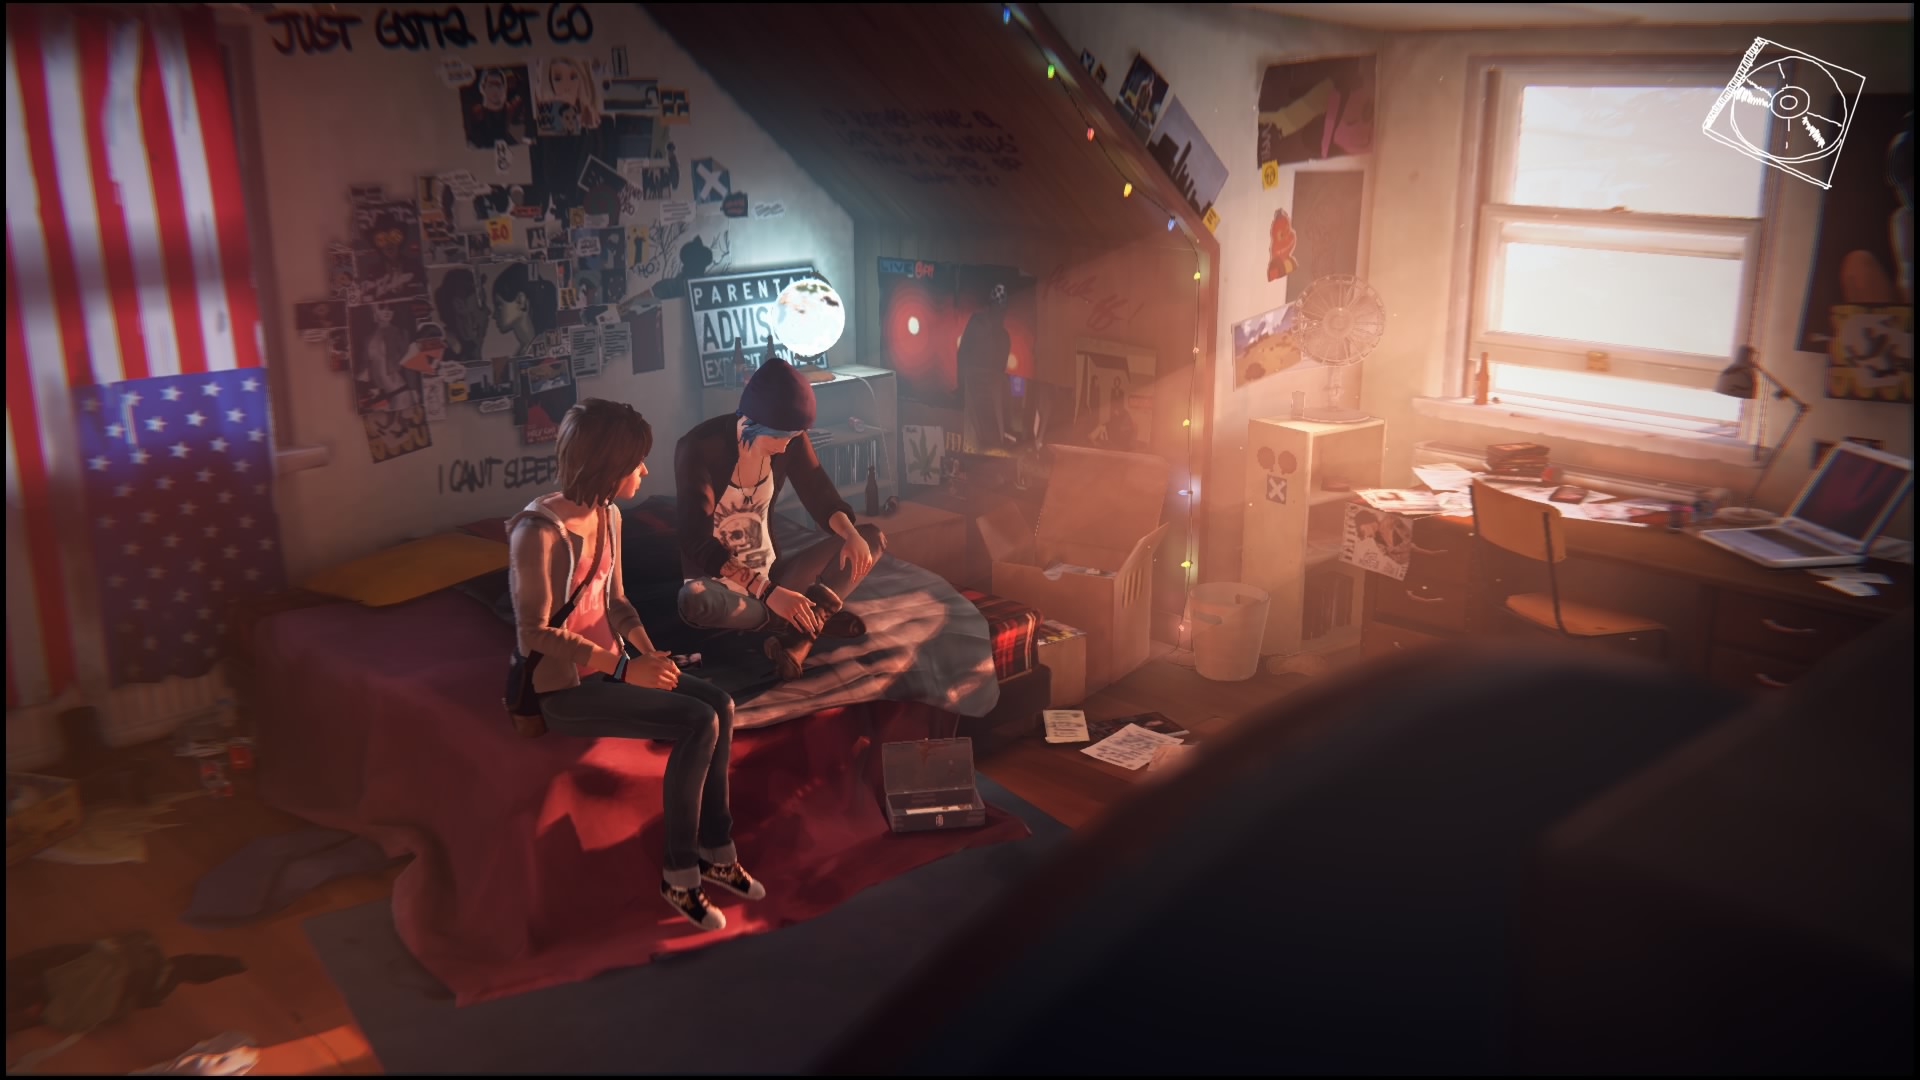 Magnificent Life Is Strange Wallpaper Full HD Pictures